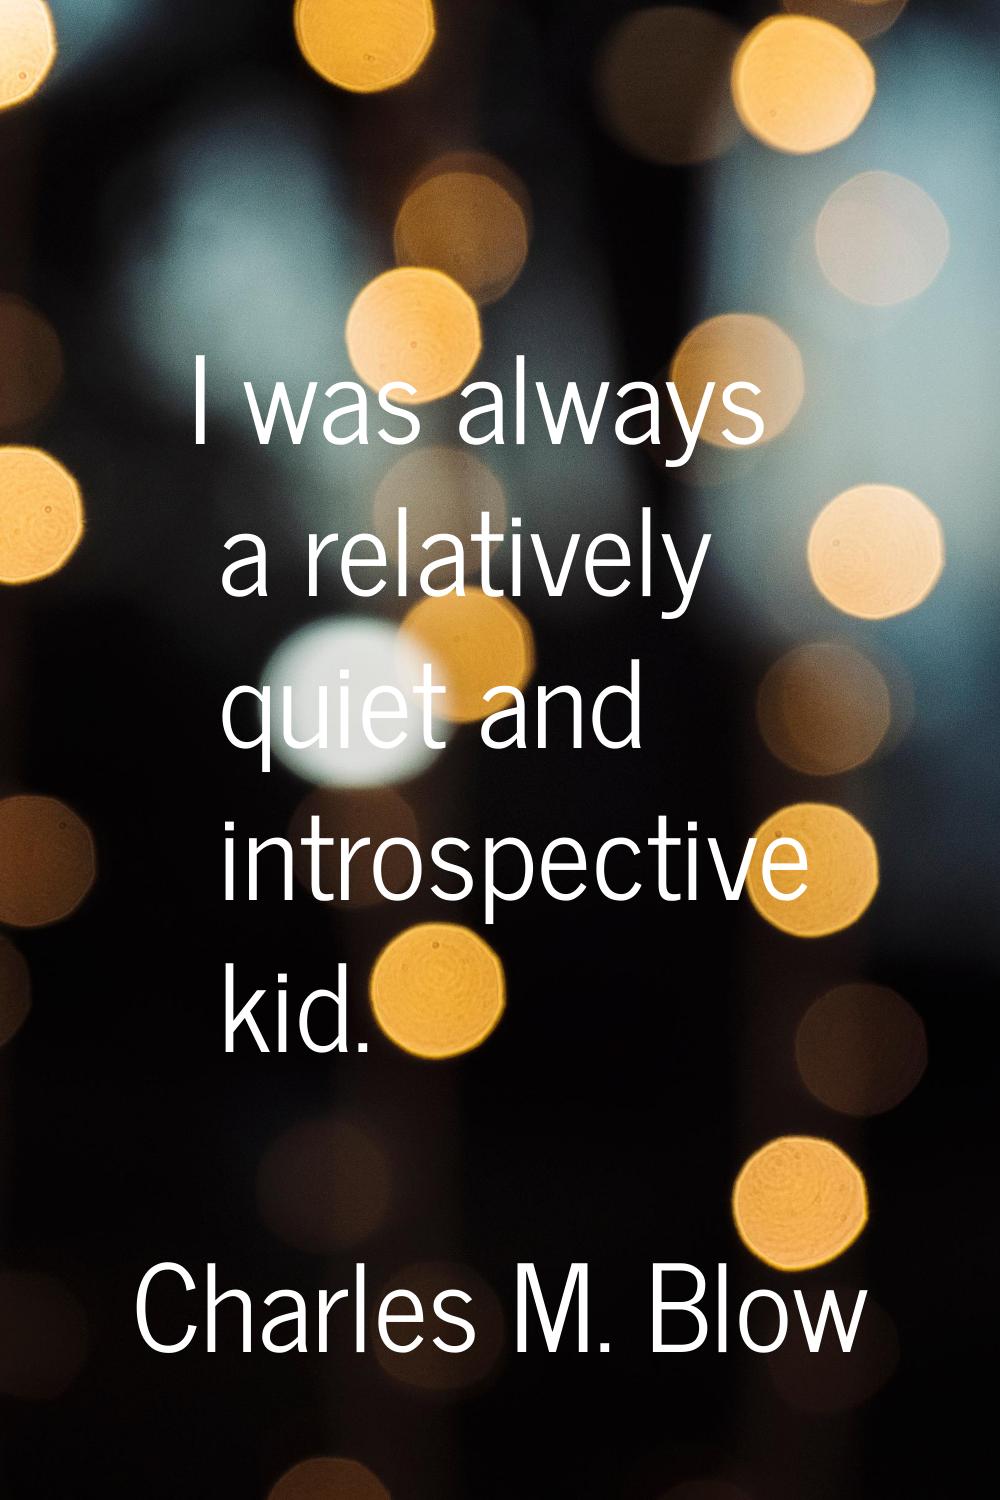 I was always a relatively quiet and introspective kid.